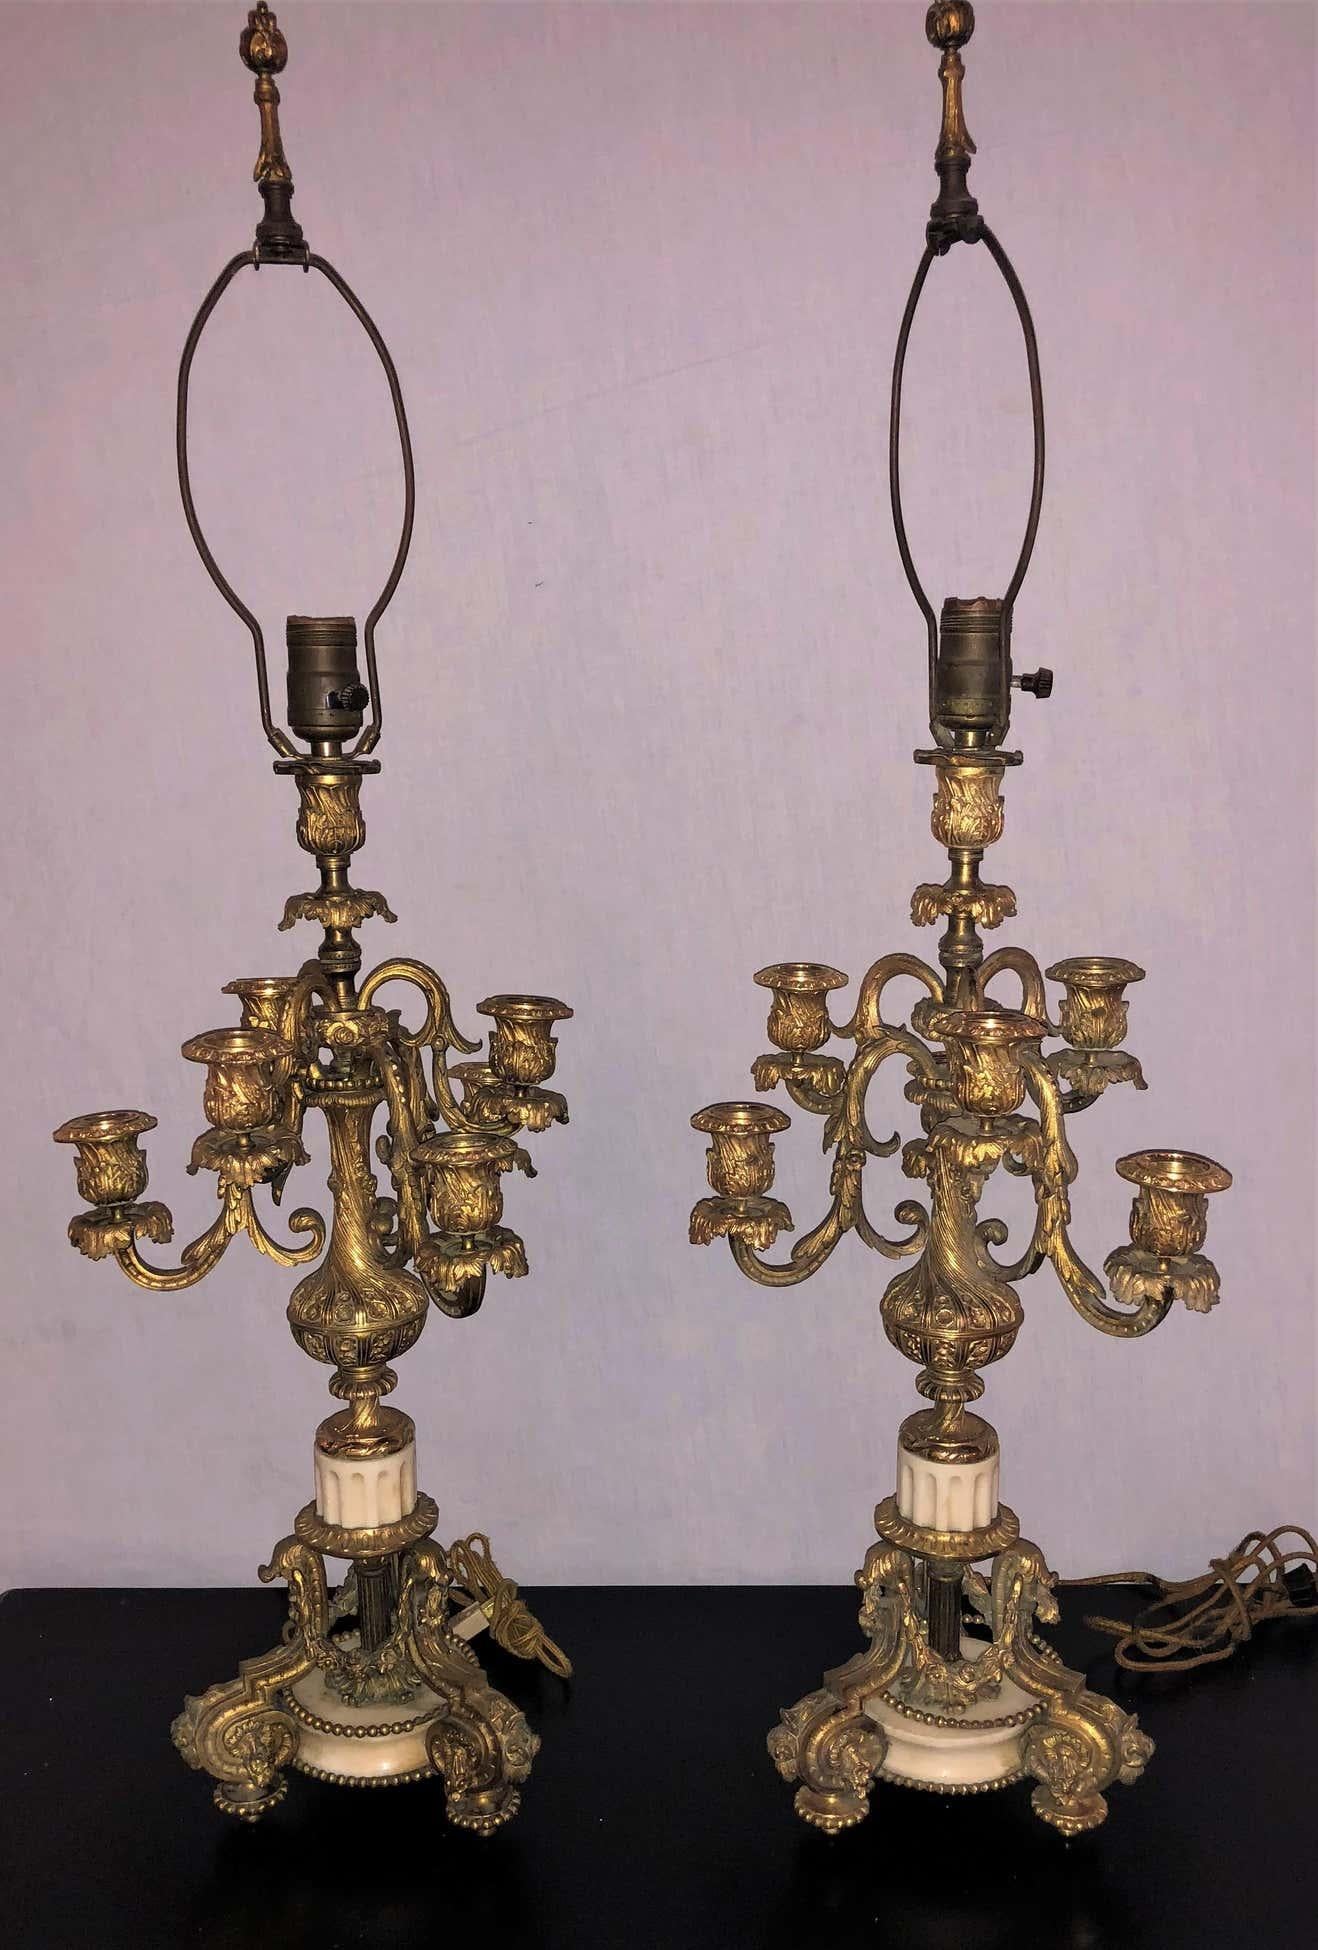 Pair of 19th Century Doré Bronze 7-Light Marble Base Candelabras Mounted as Lamp In Good Condition For Sale In Stamford, CT